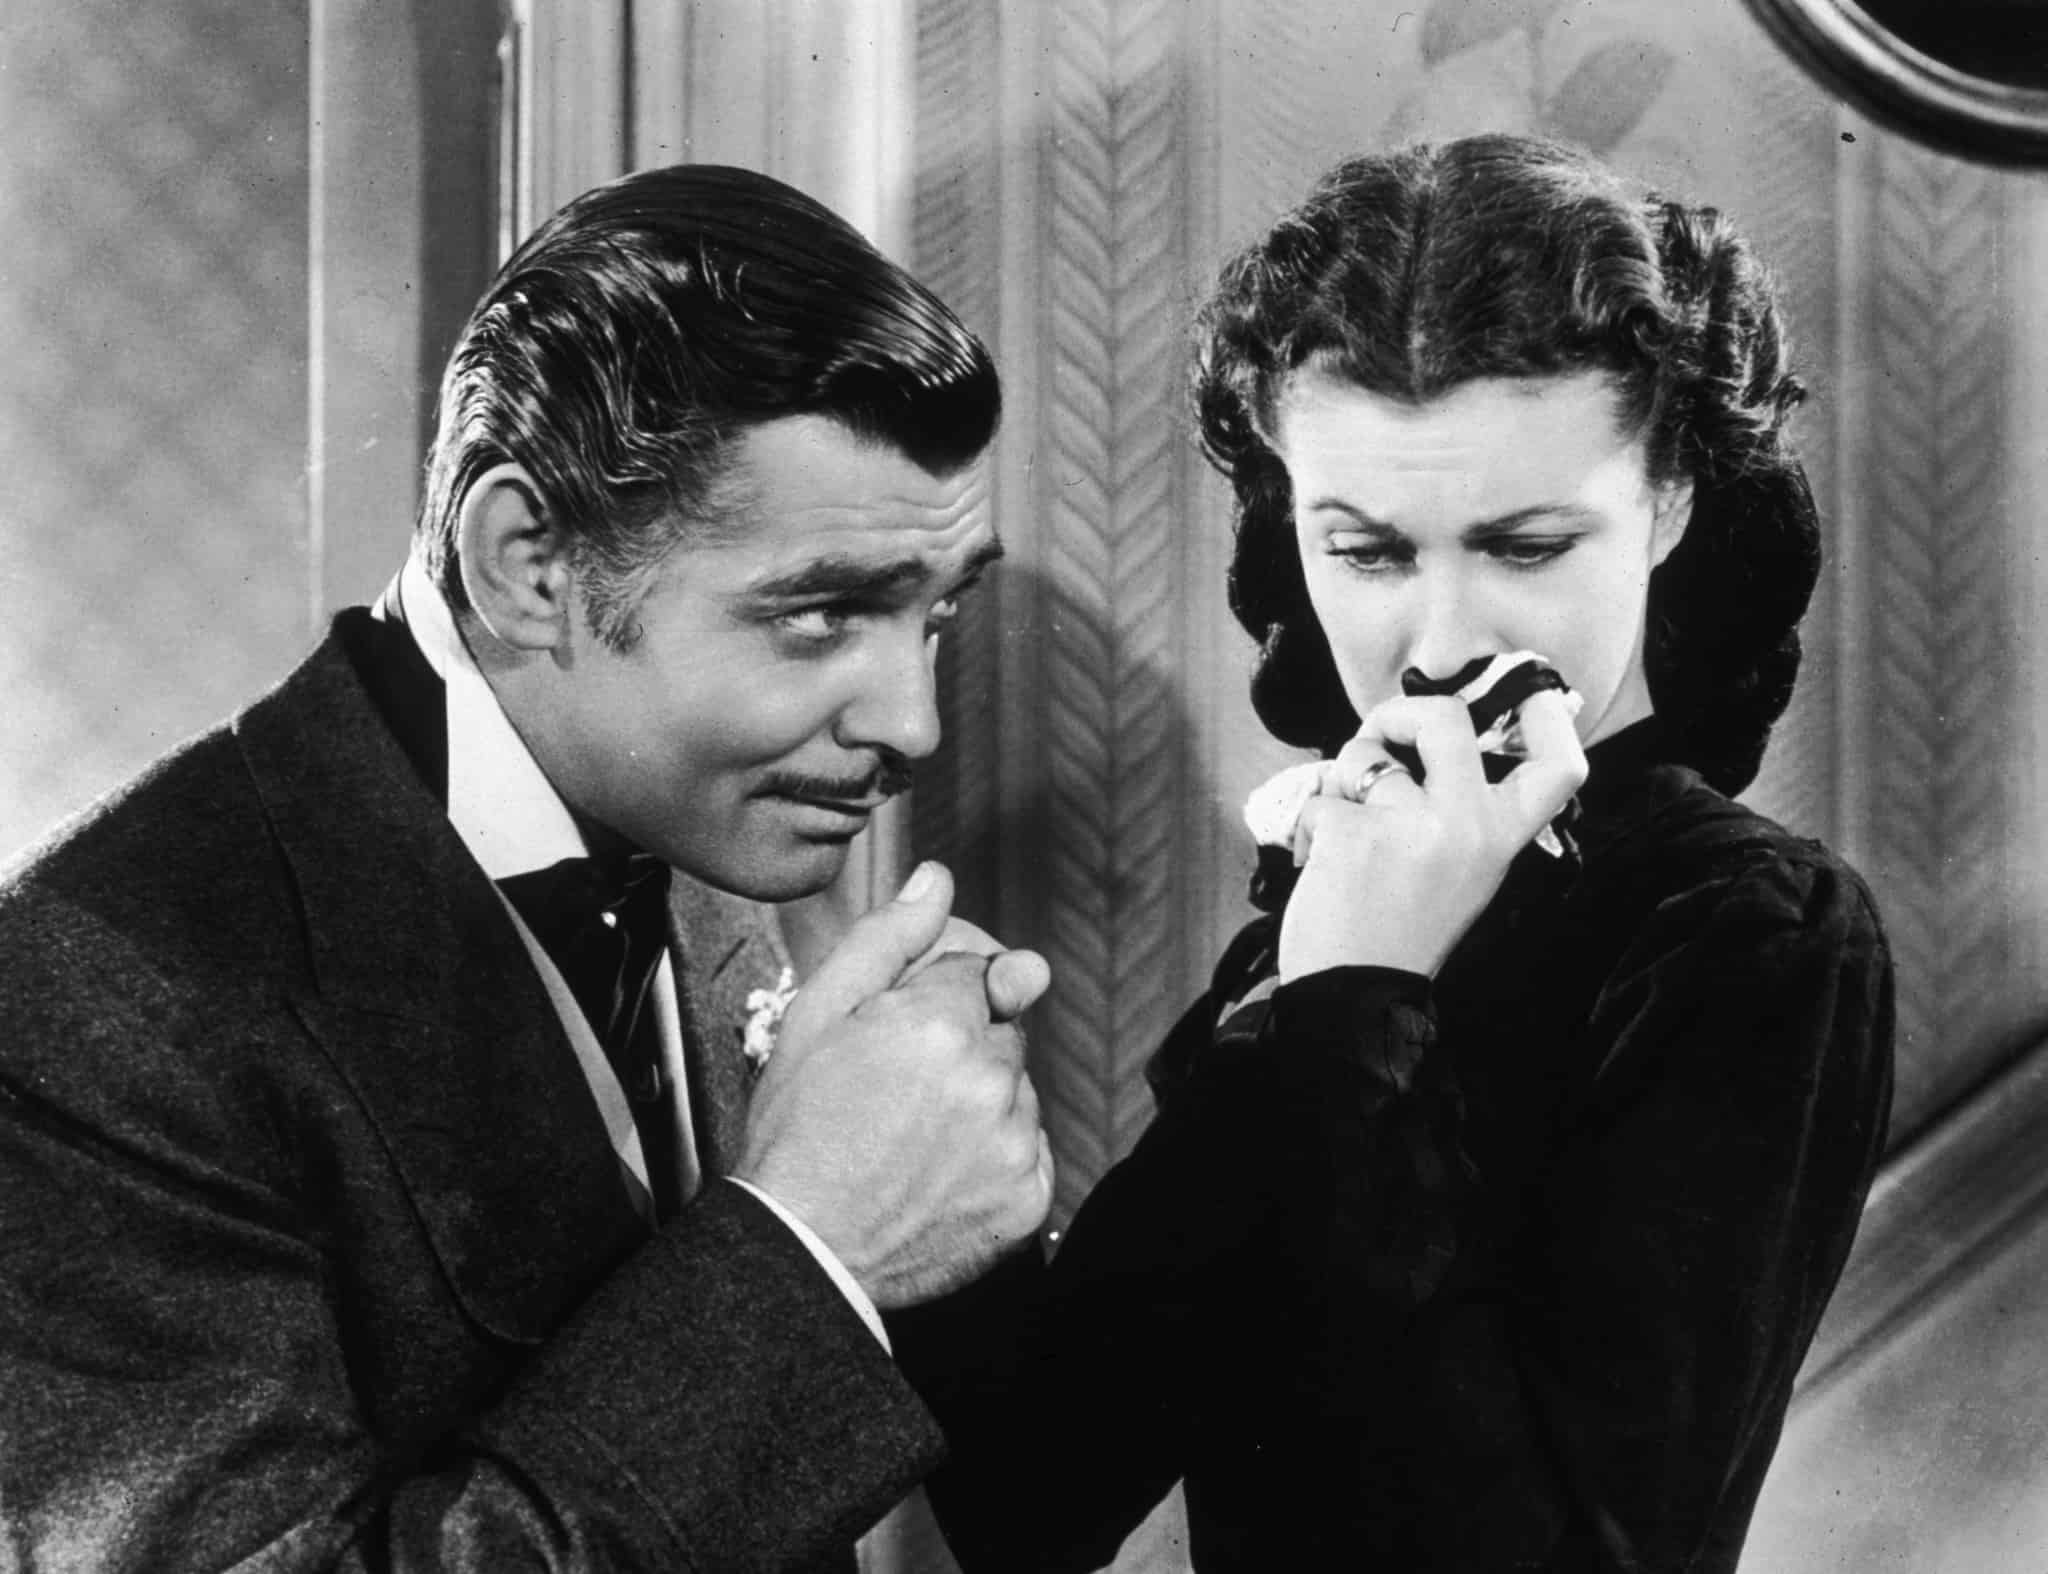 Clark Gable kissing the hand of Vivien Leigh in this image from Selznick International Pictures.